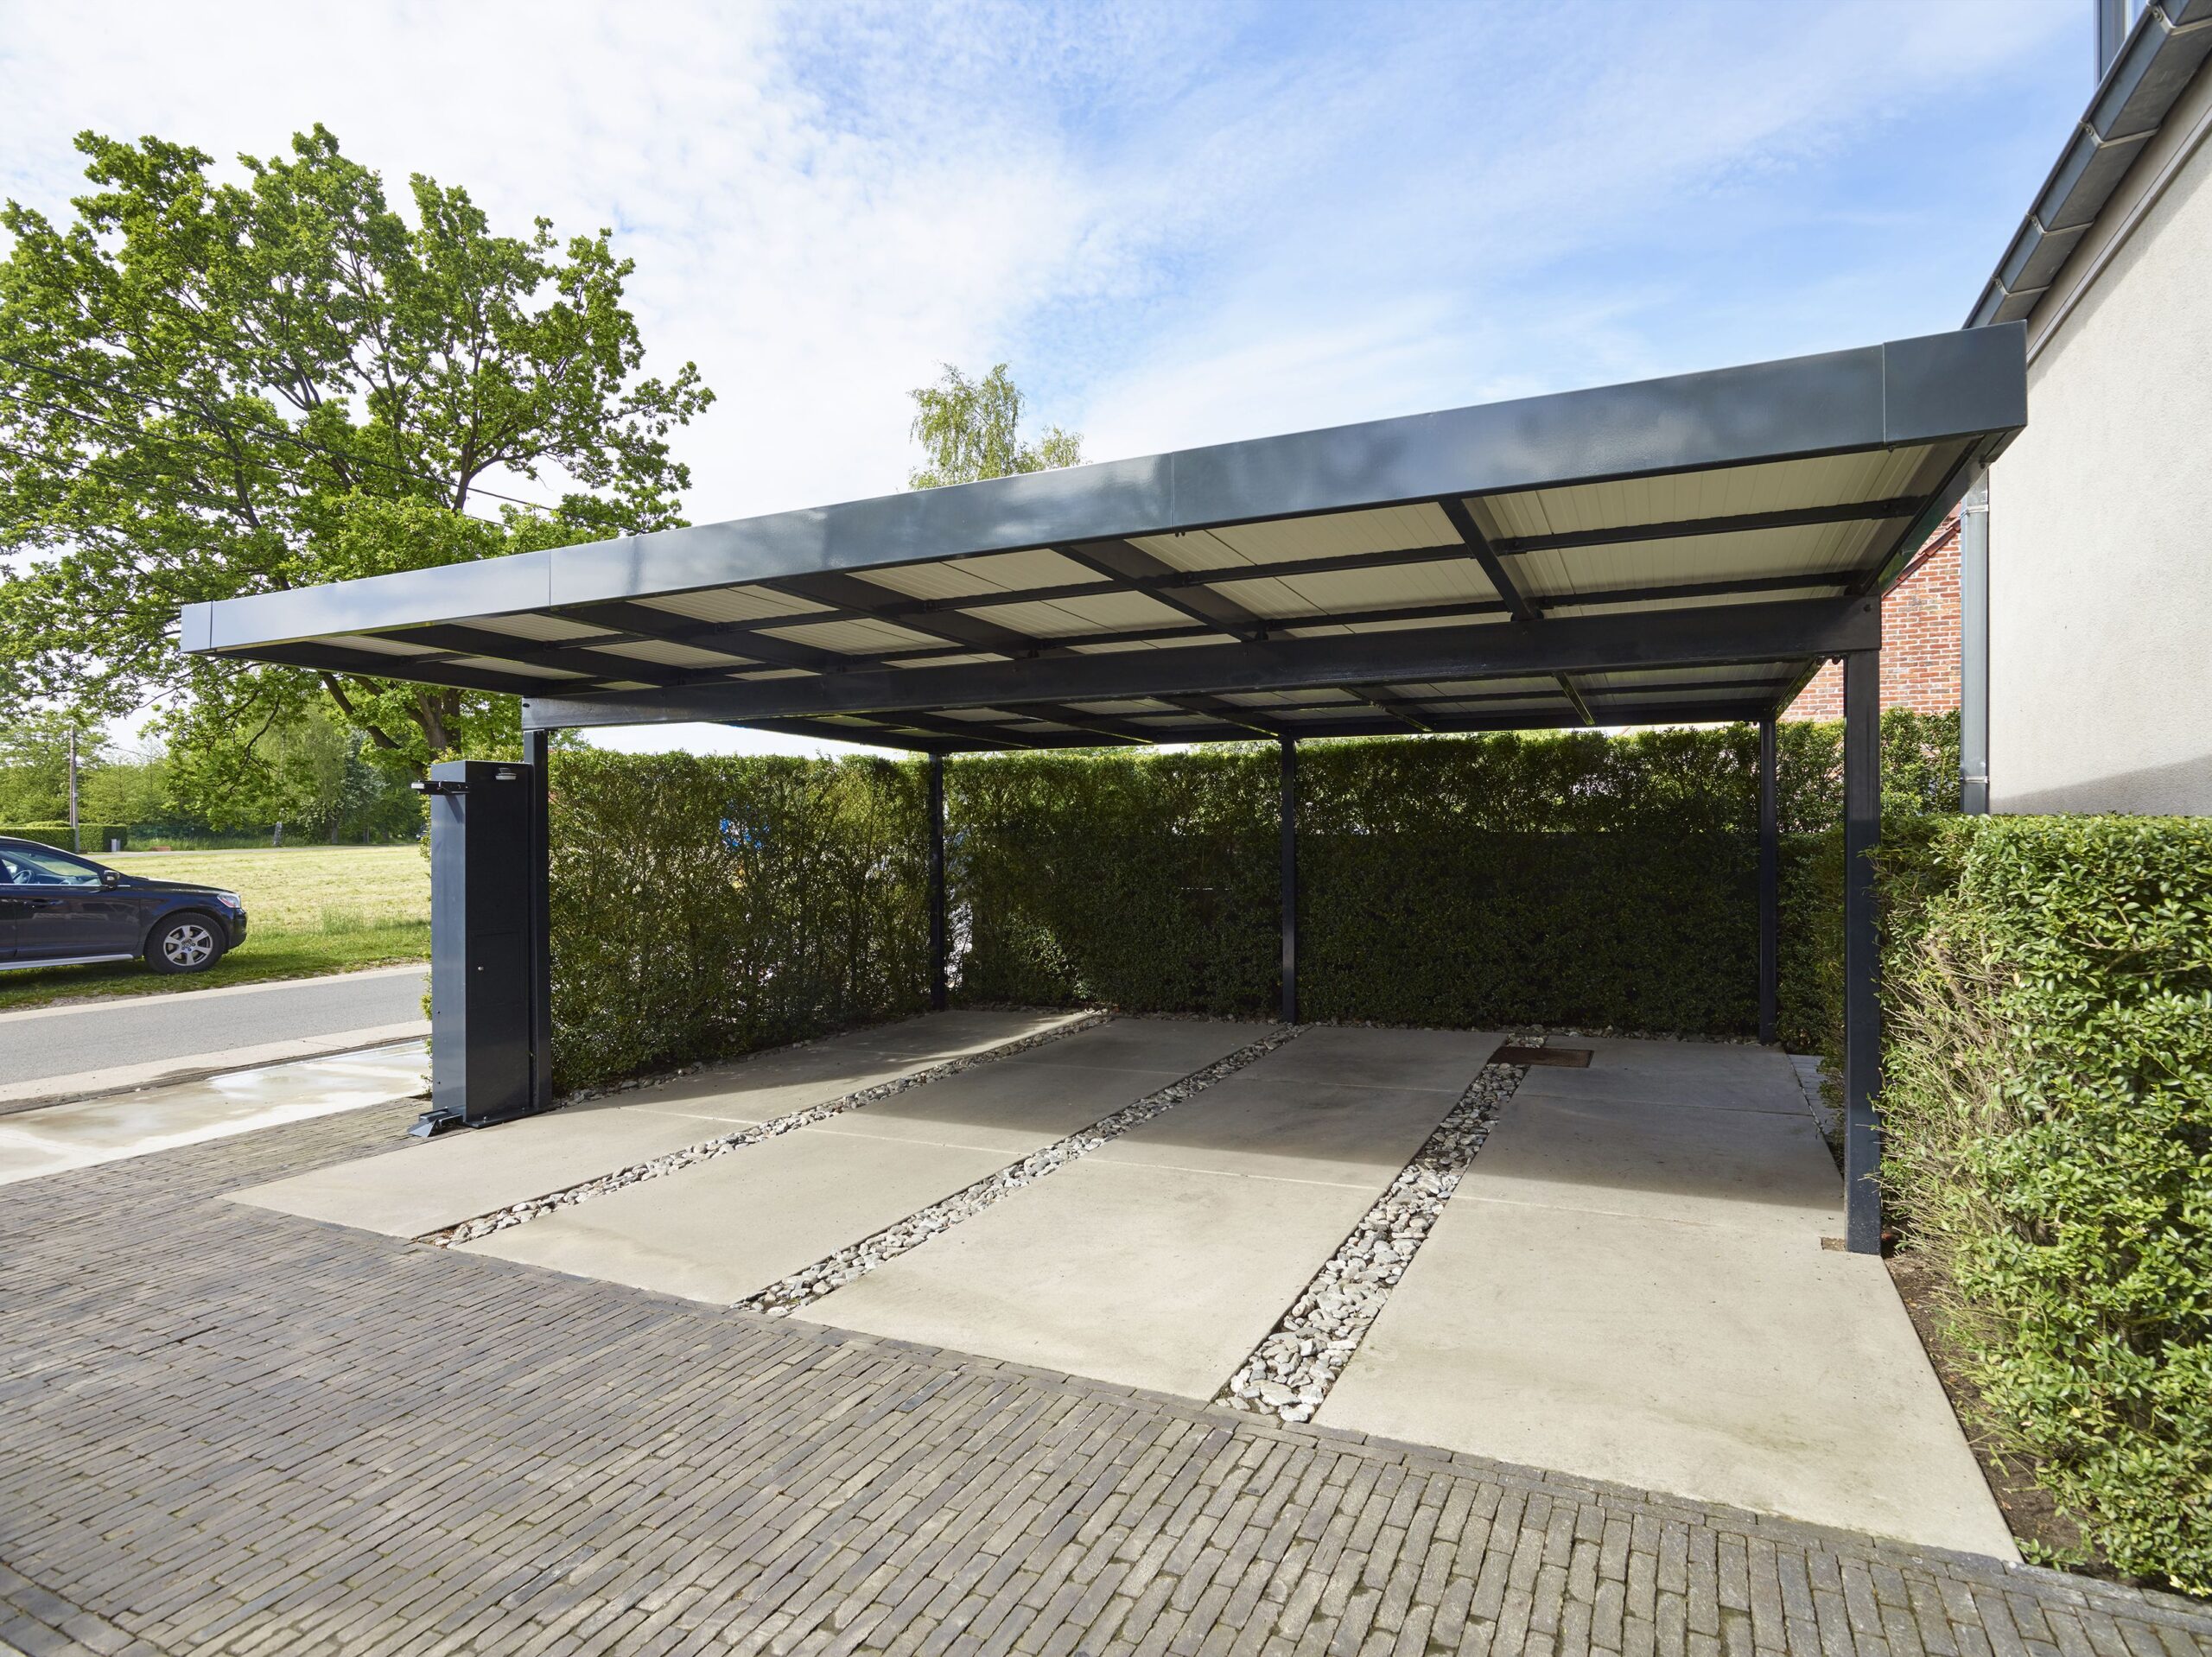 How to choose the right carport builder for your needs